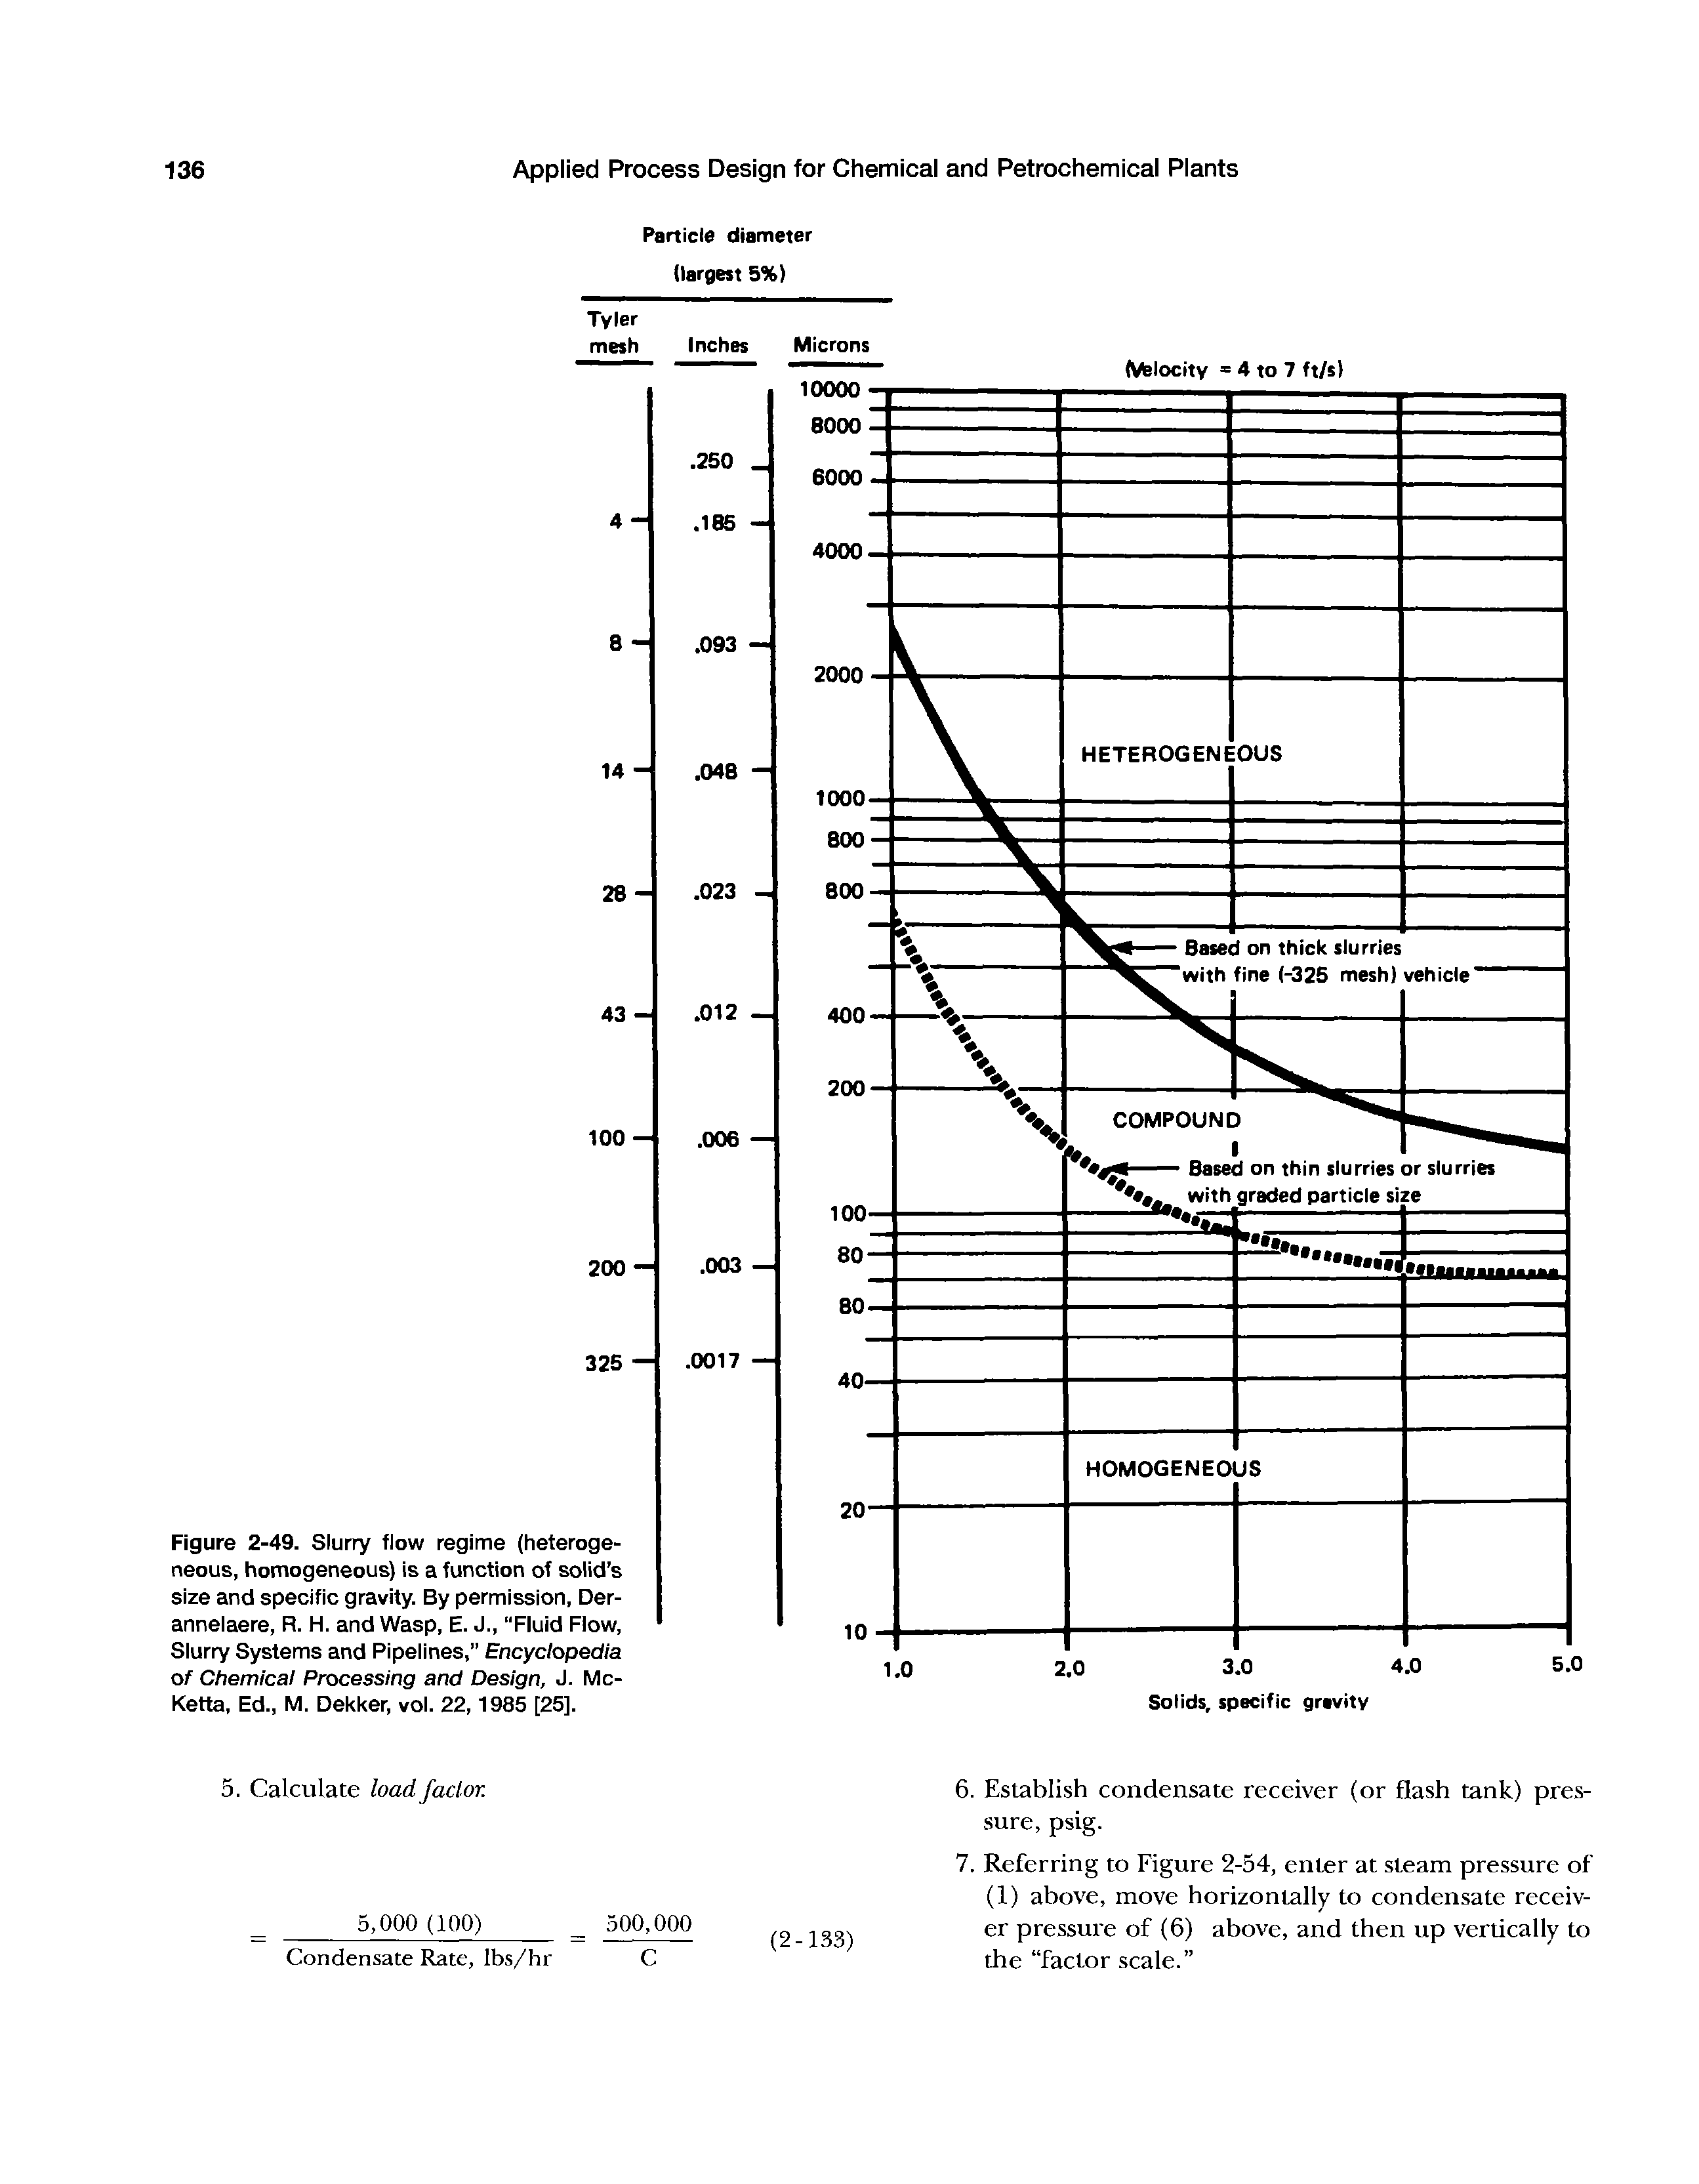 Figure 2-49. Slurry flow regime (heterogeneous, homogeneous) is a function of solid s size and specific gravity. By permission, Der-annelaere, R. H. and Wasp, E. J., "Fluid Flow, Slurry Systems and Pipelines," Encyclopedia of Chemical Processing and Design, J. Mc-Ketta, Ed., M. Dekker, vol. 22,1985 [25].